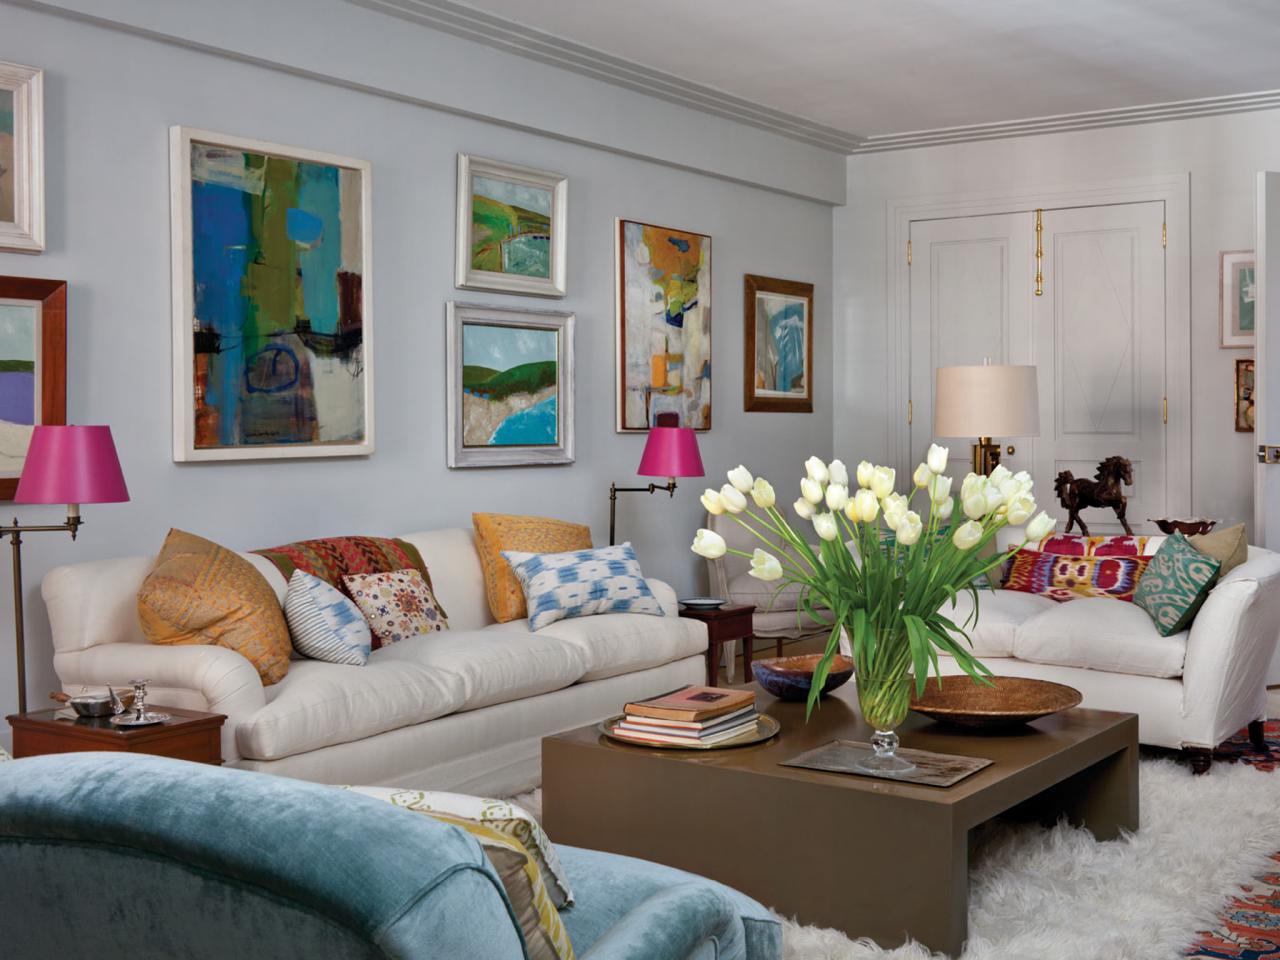 White Eclectic Living Room With Colorful Accent Pillows